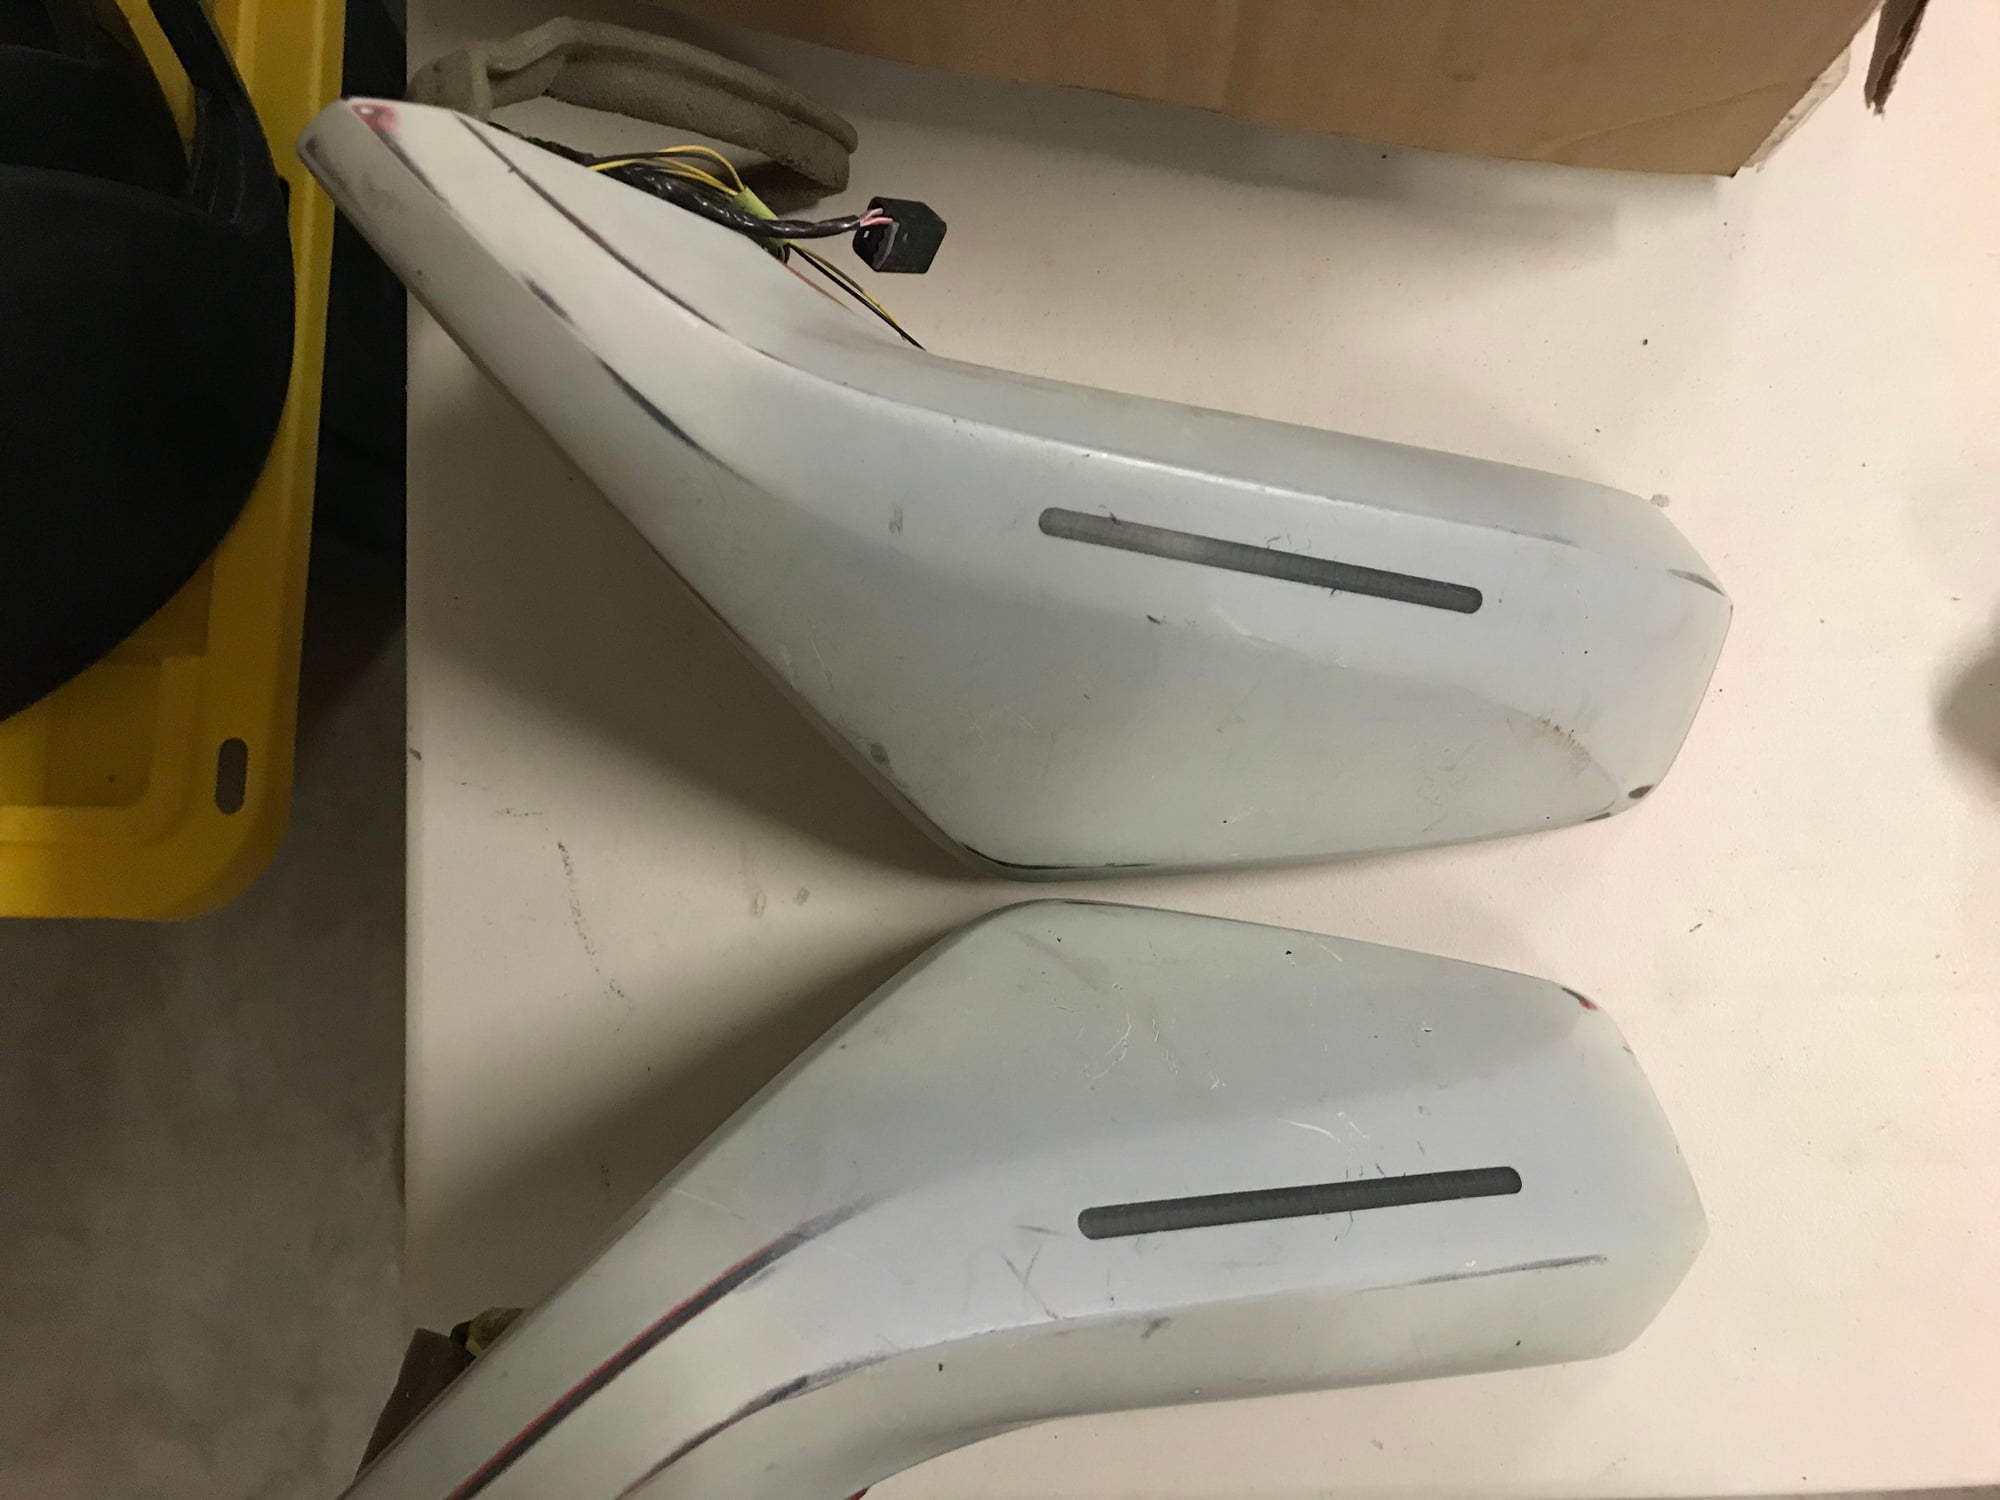  - 5th Gen Camaro custom door mirrors with integrated LED blinkers - San Diego, CA 92067, United States